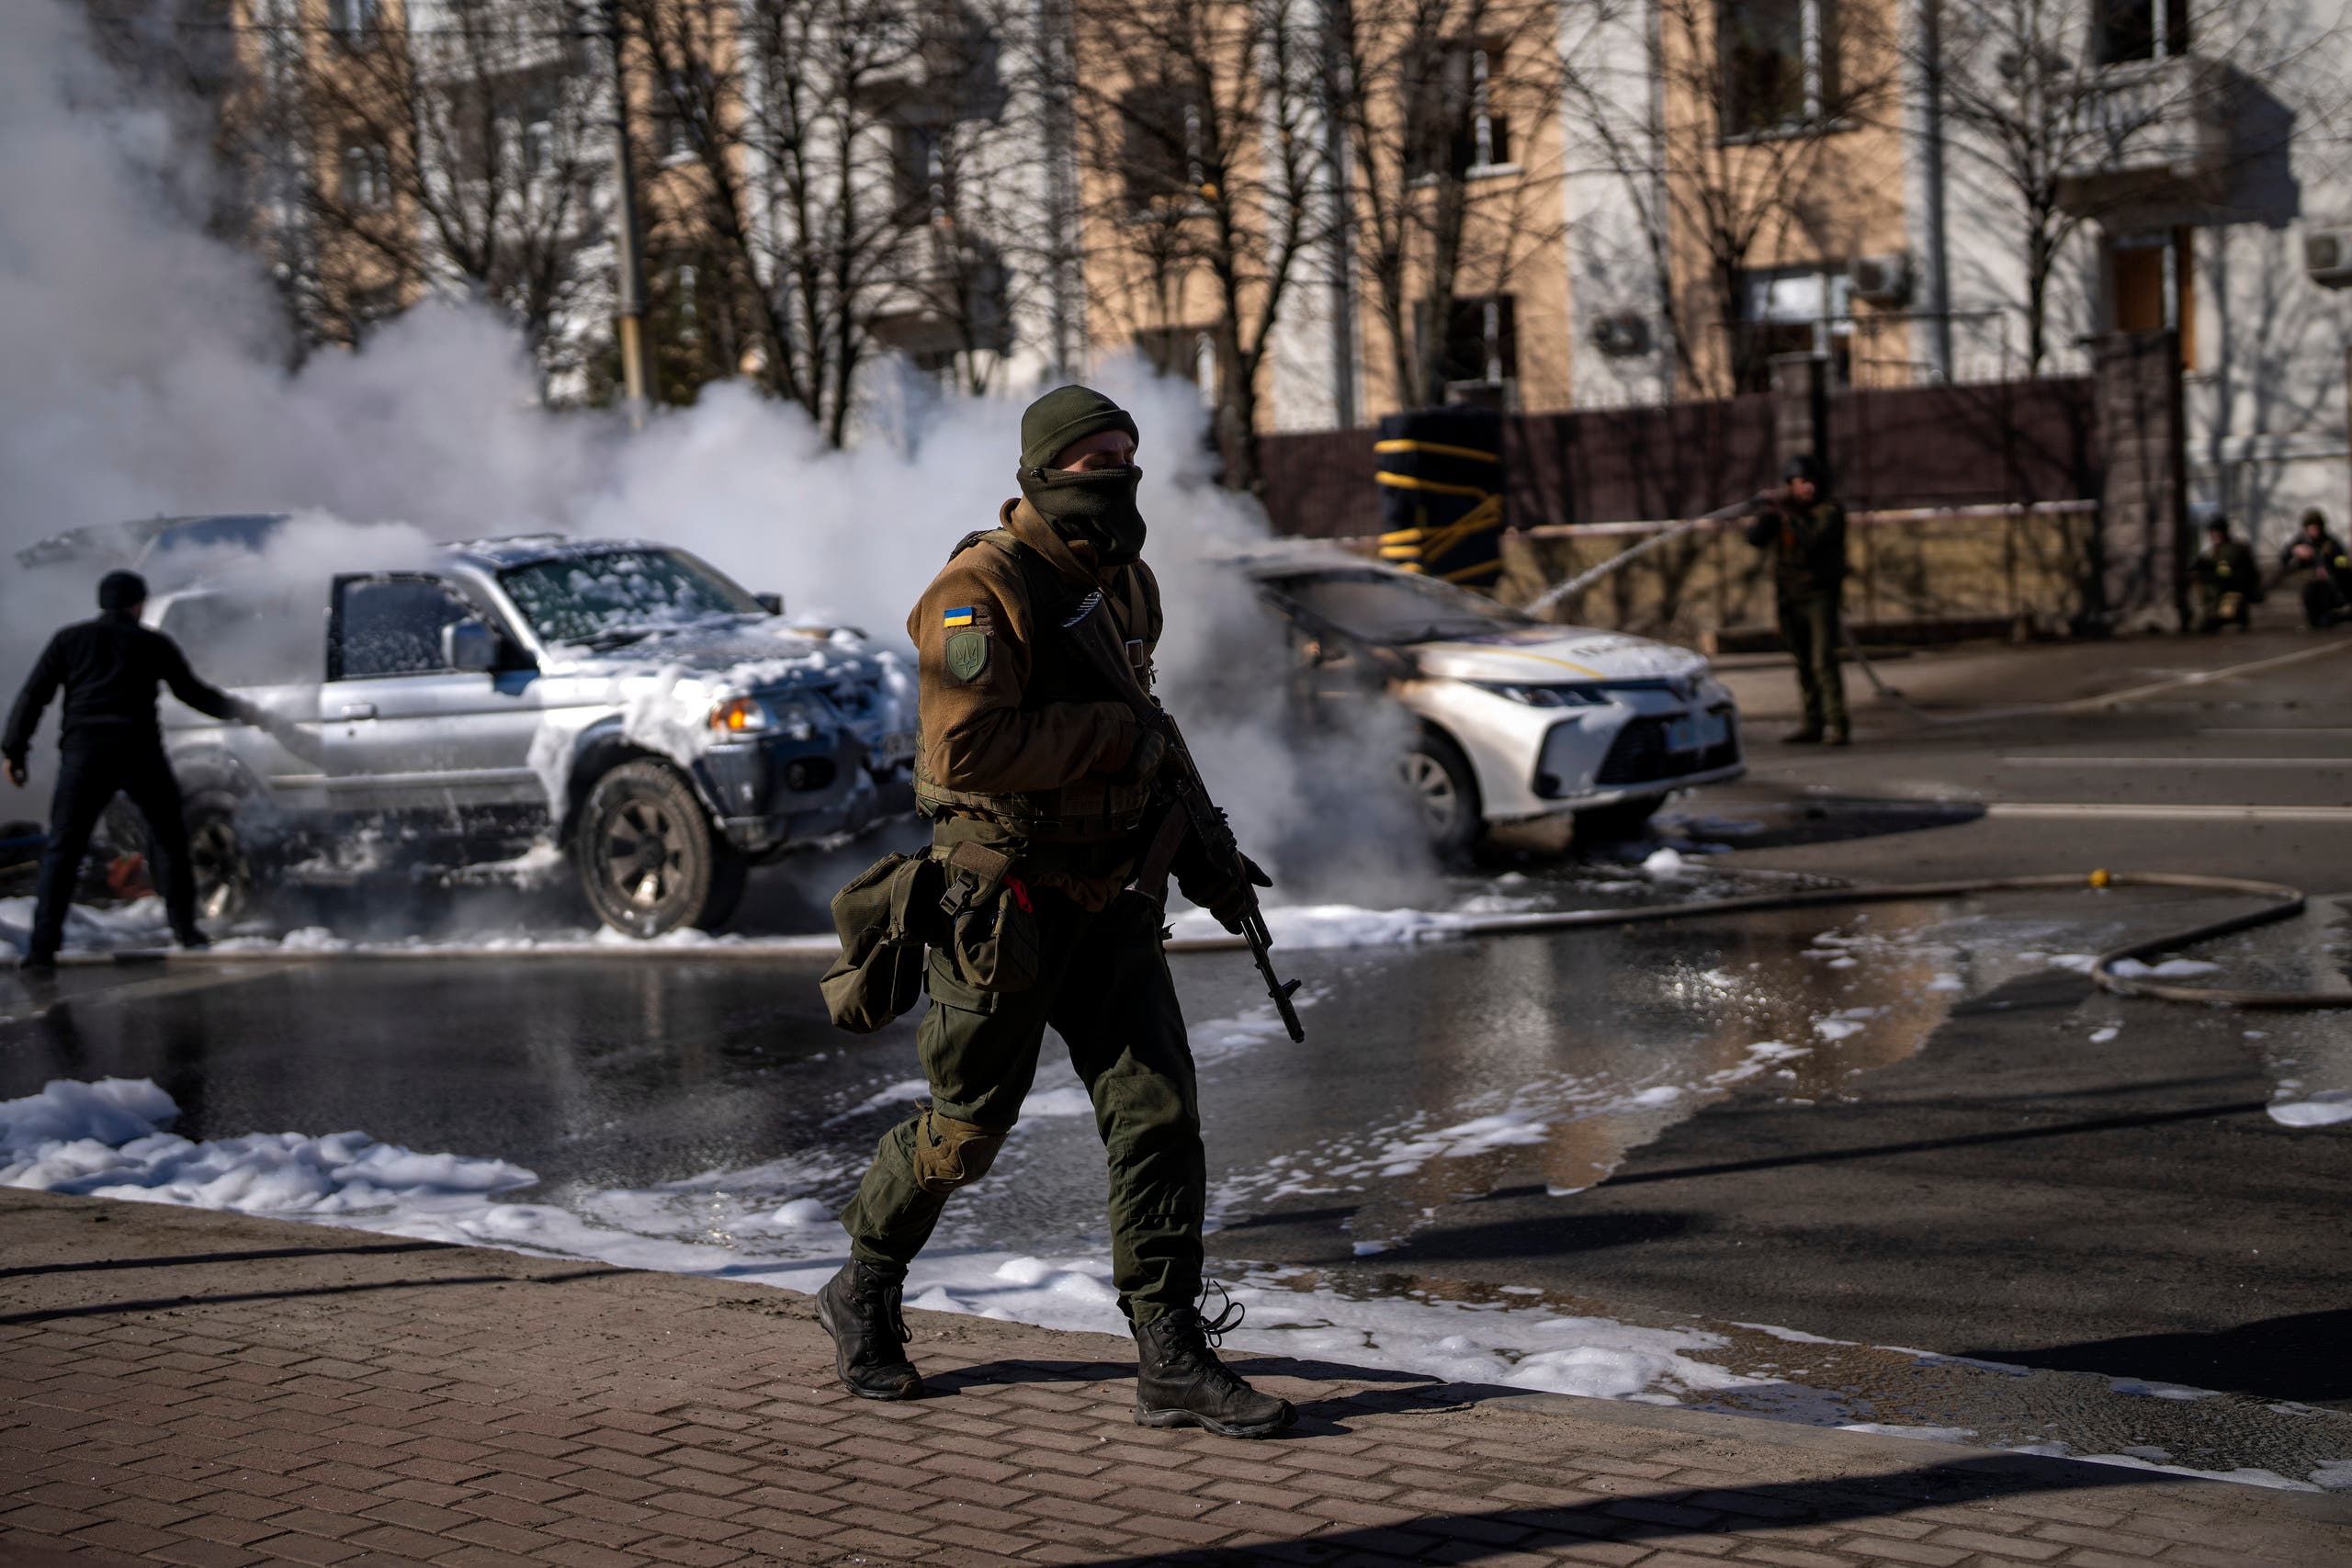 Ukrainian soldiers take positions outside a military facility as two cars burn, in a street in Kyiv, Ukraine, Saturday, Feb. 26, 2022. (AP)